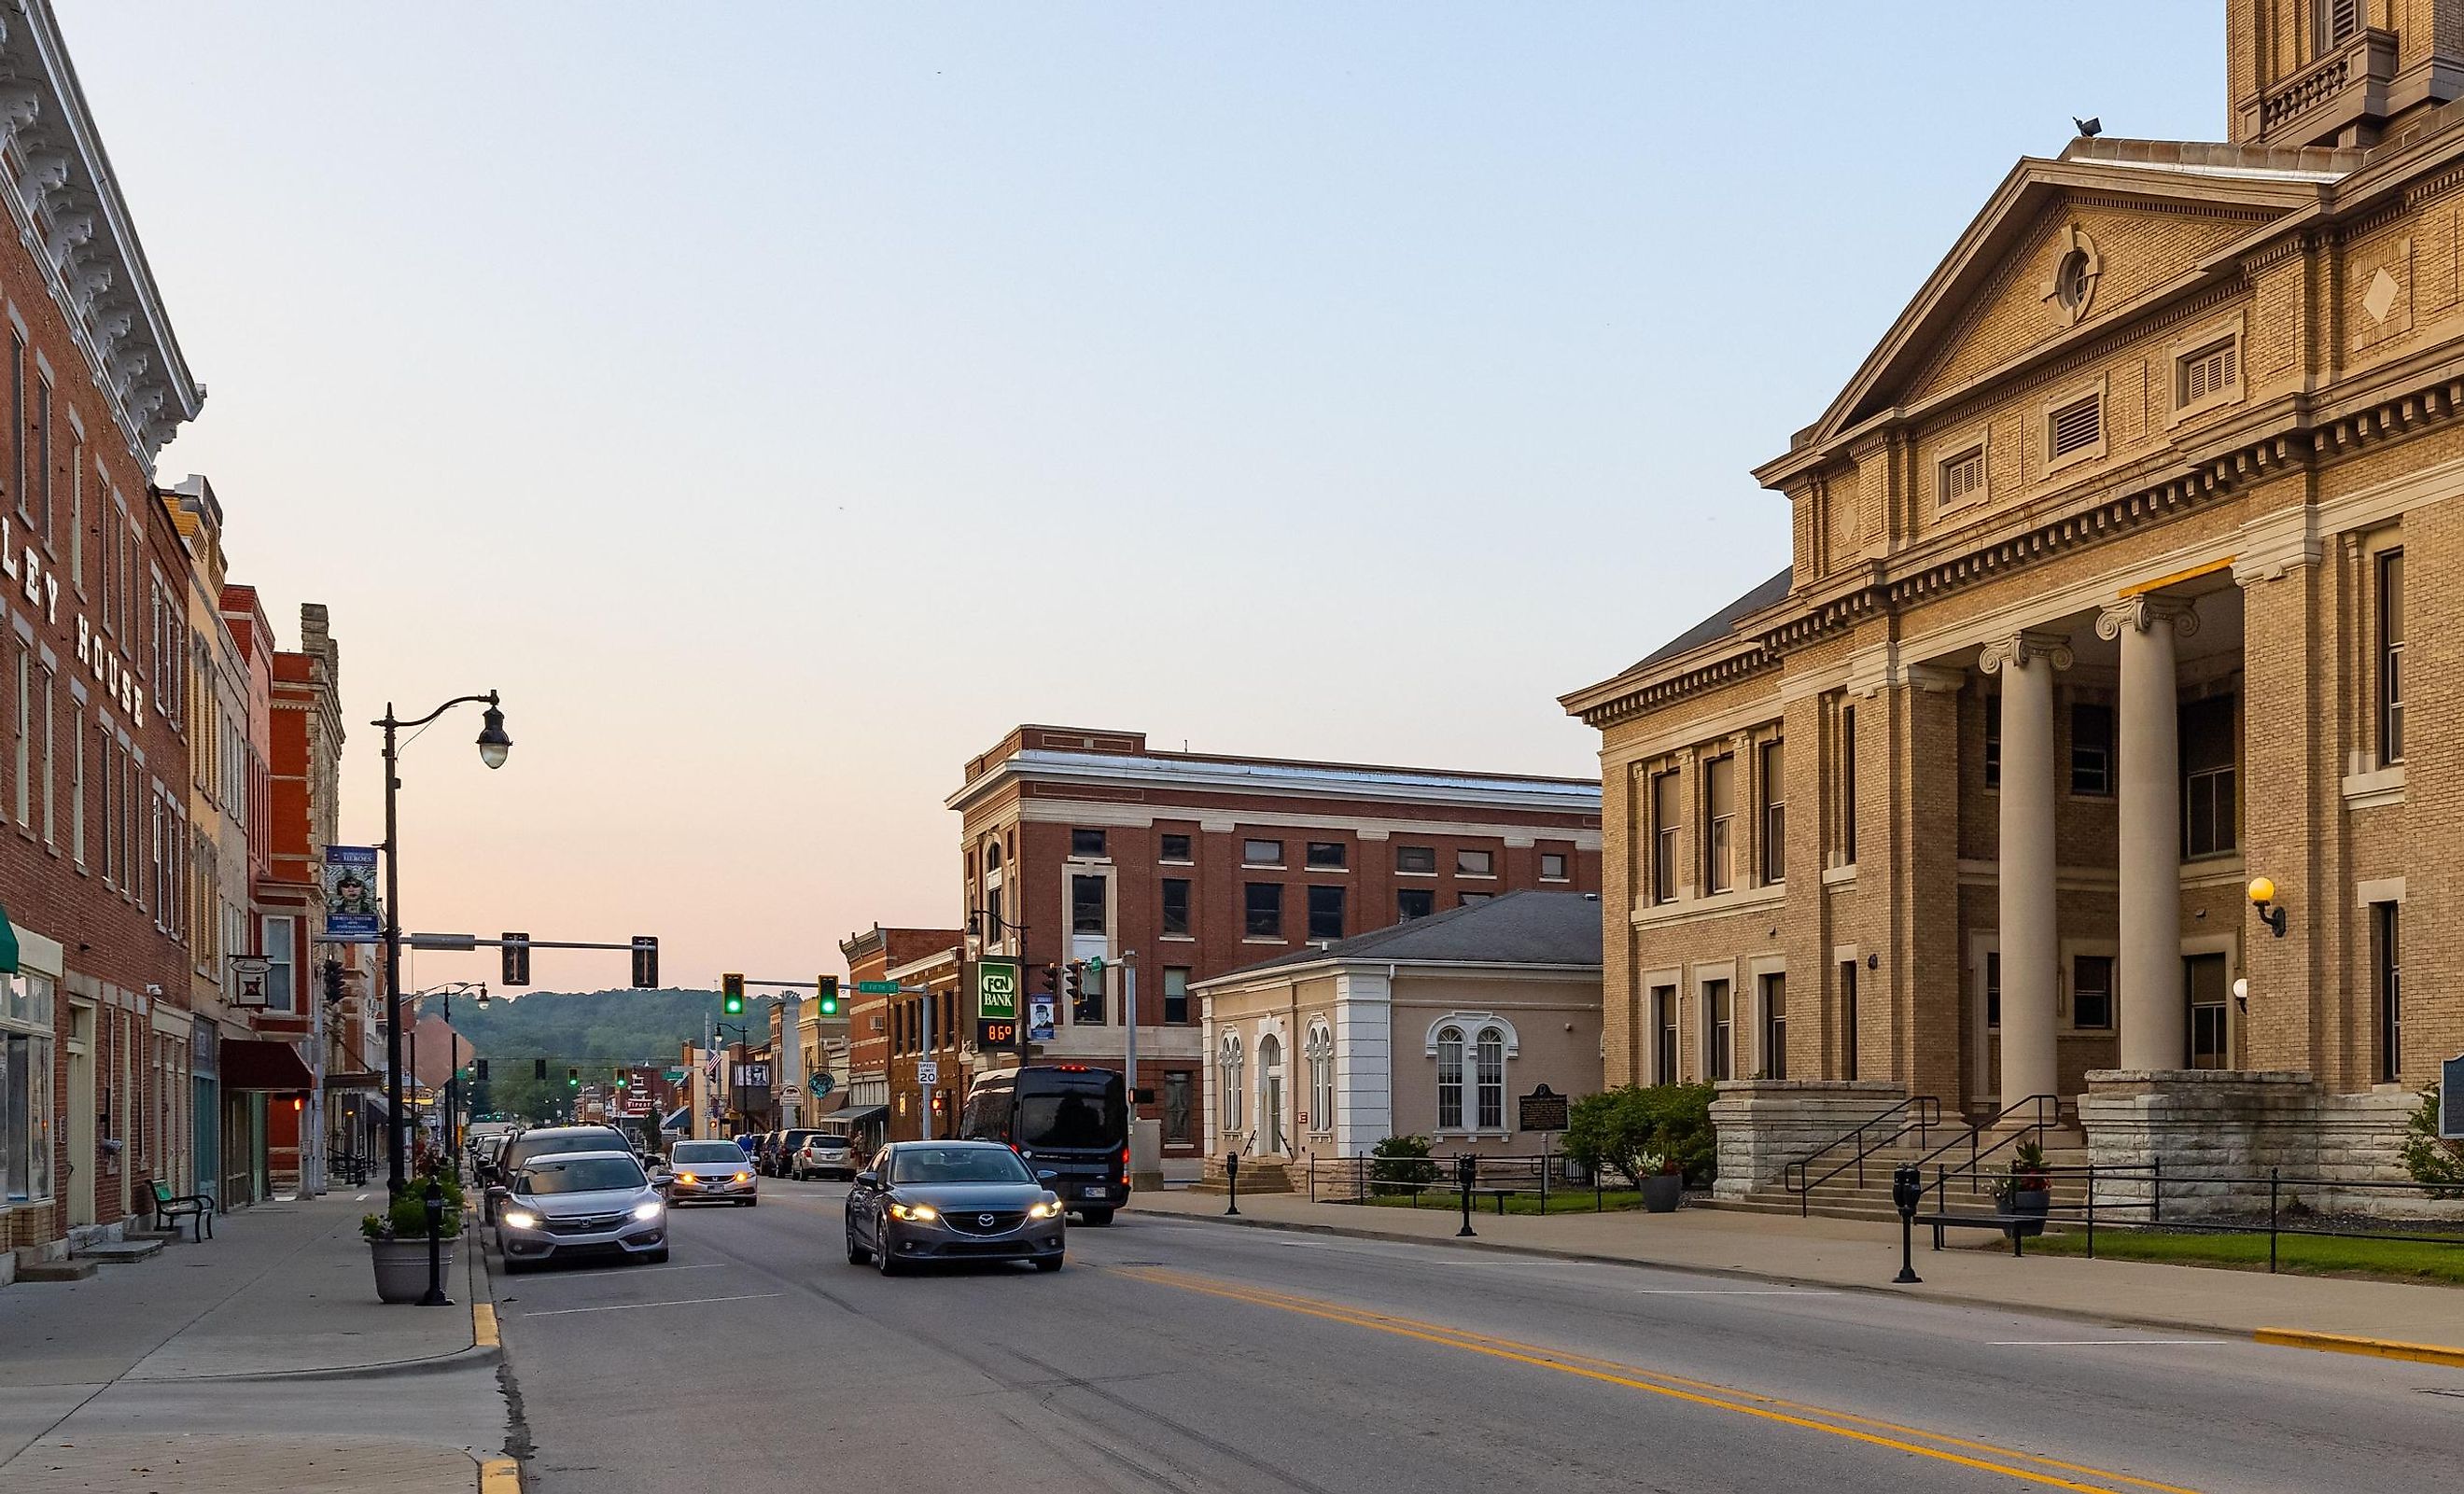 Brookville, Indiana, USA - August 20, 2021: The Franklin County Courthouse